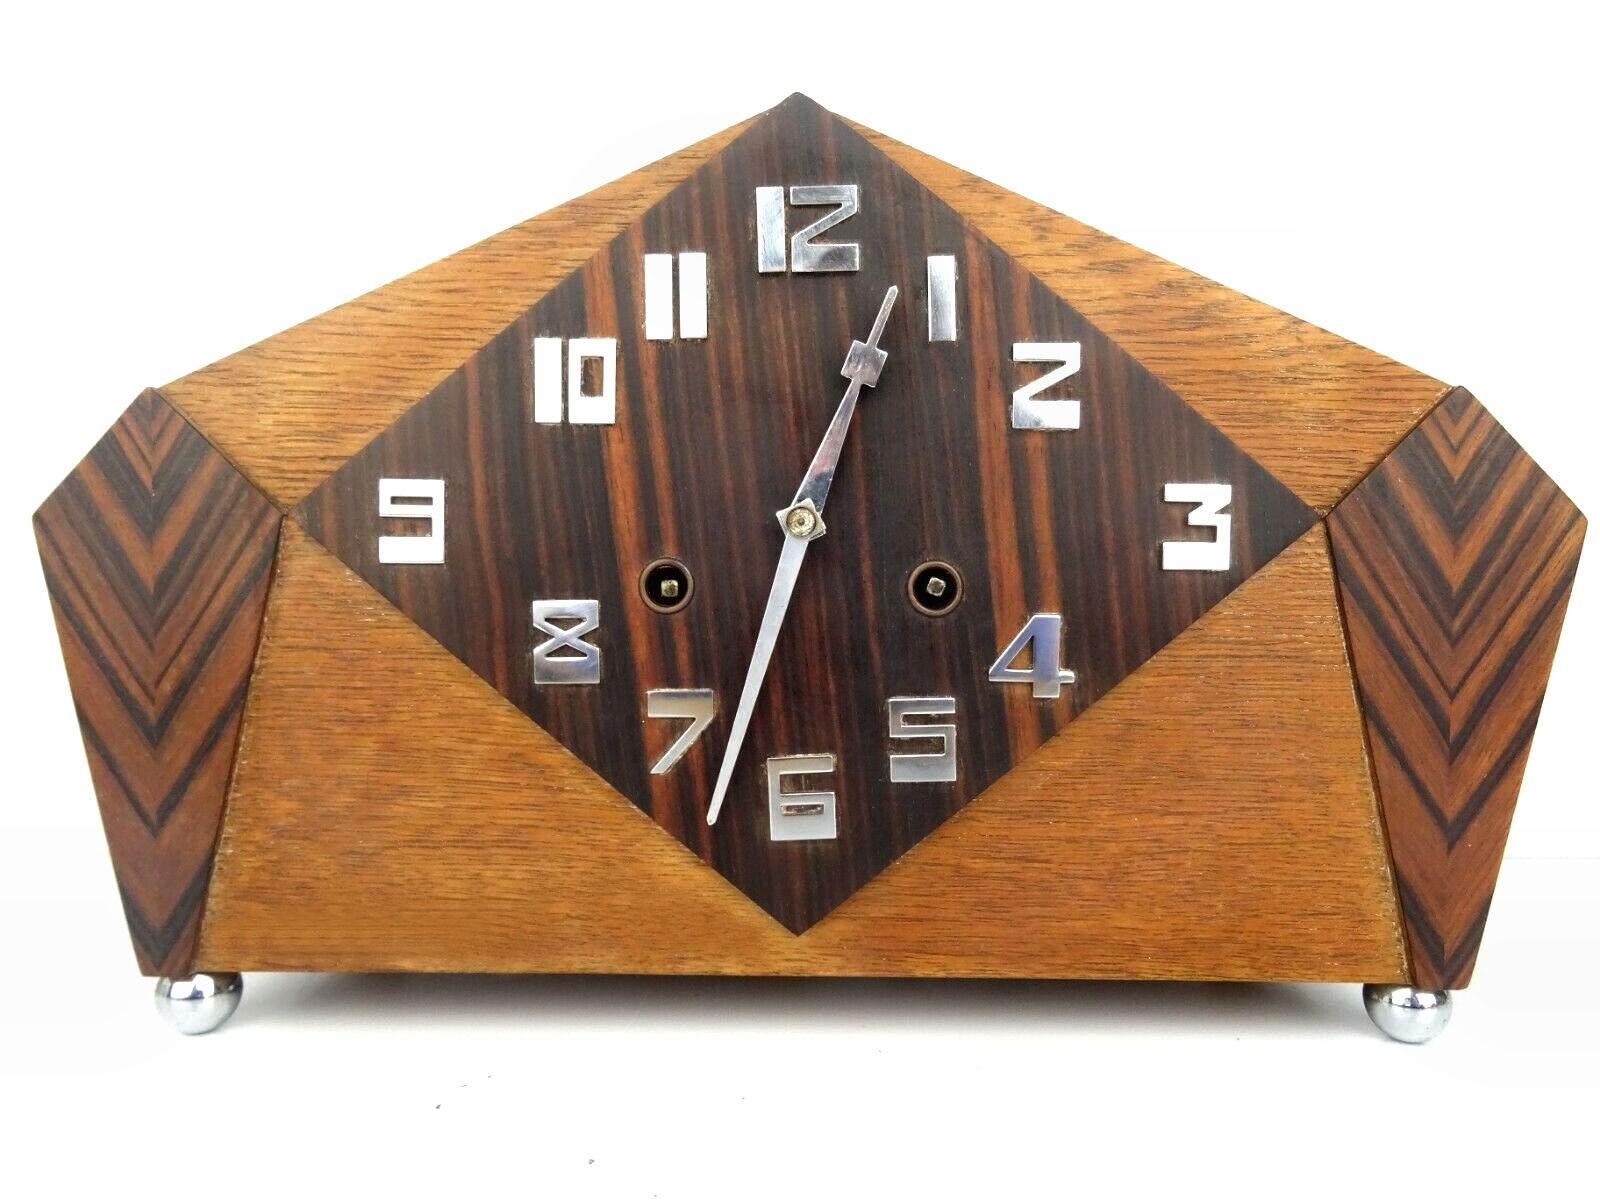 Absolutely spectacular oak & calamander Art Deco mantel clock manufactured by Pfeilkreuz Junghans clock company In Germany in the 1930's . The case has a angular design with raised chrome numerals and dial hands. The veneer is a stunning striped